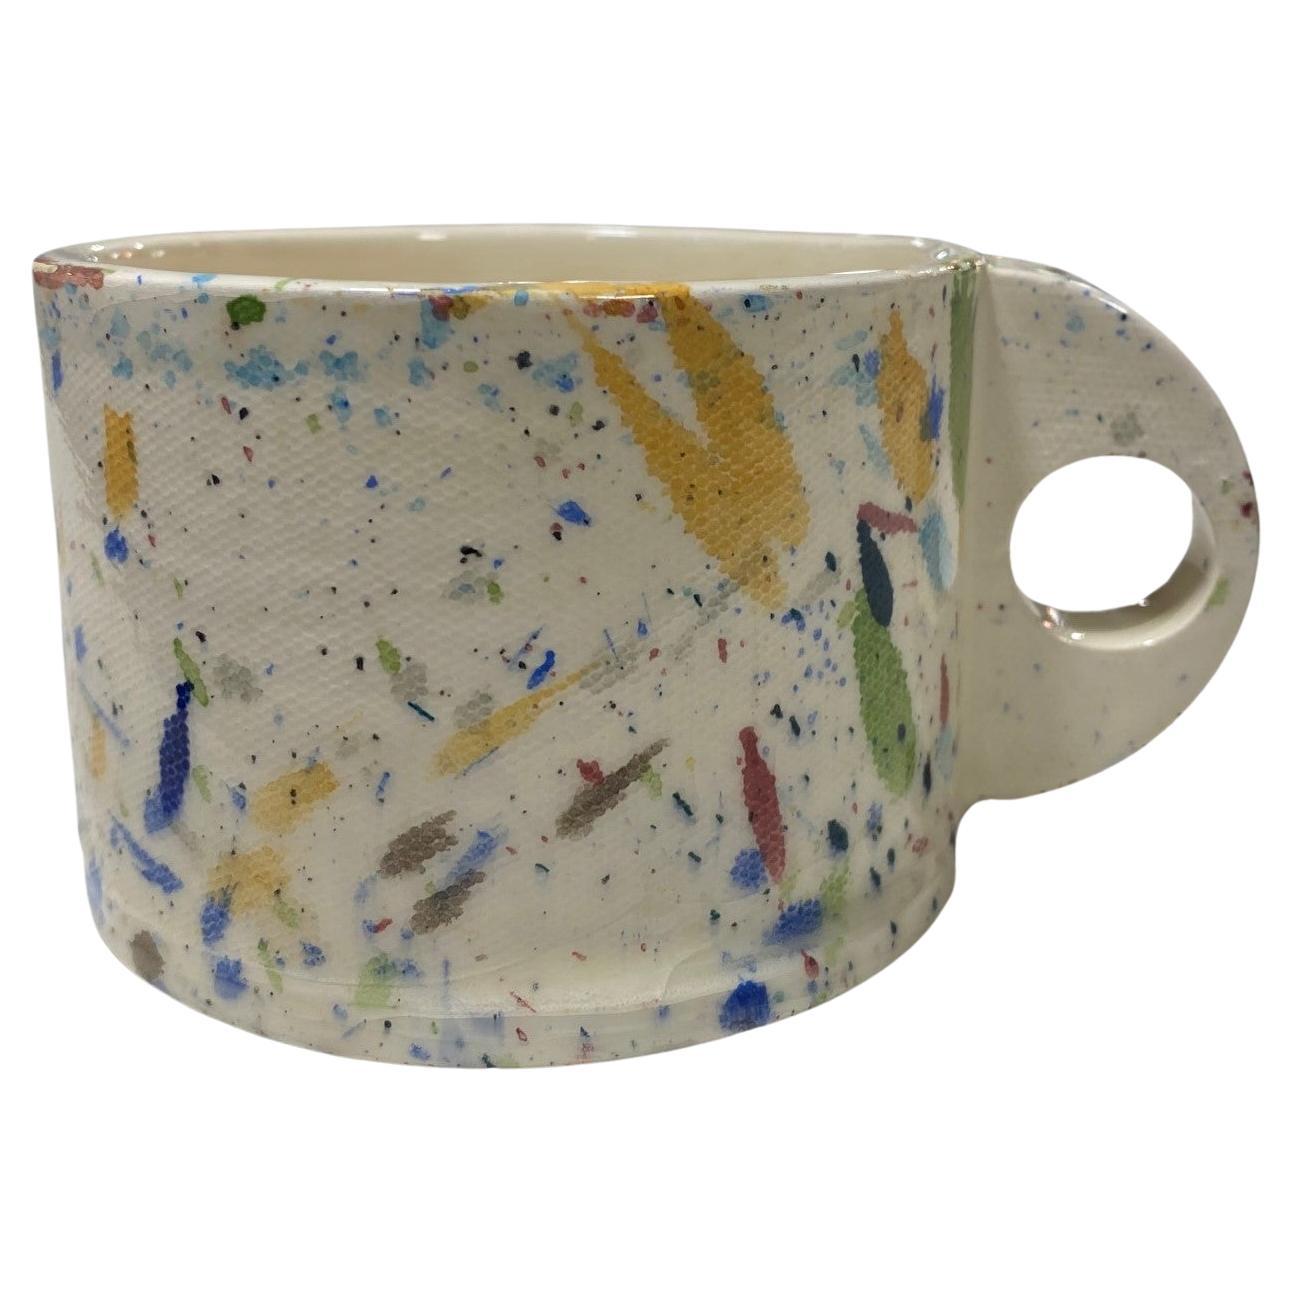 Peter Shire Exp Signed Post Modern Ceramic California Pottery Splatter Cup 1979